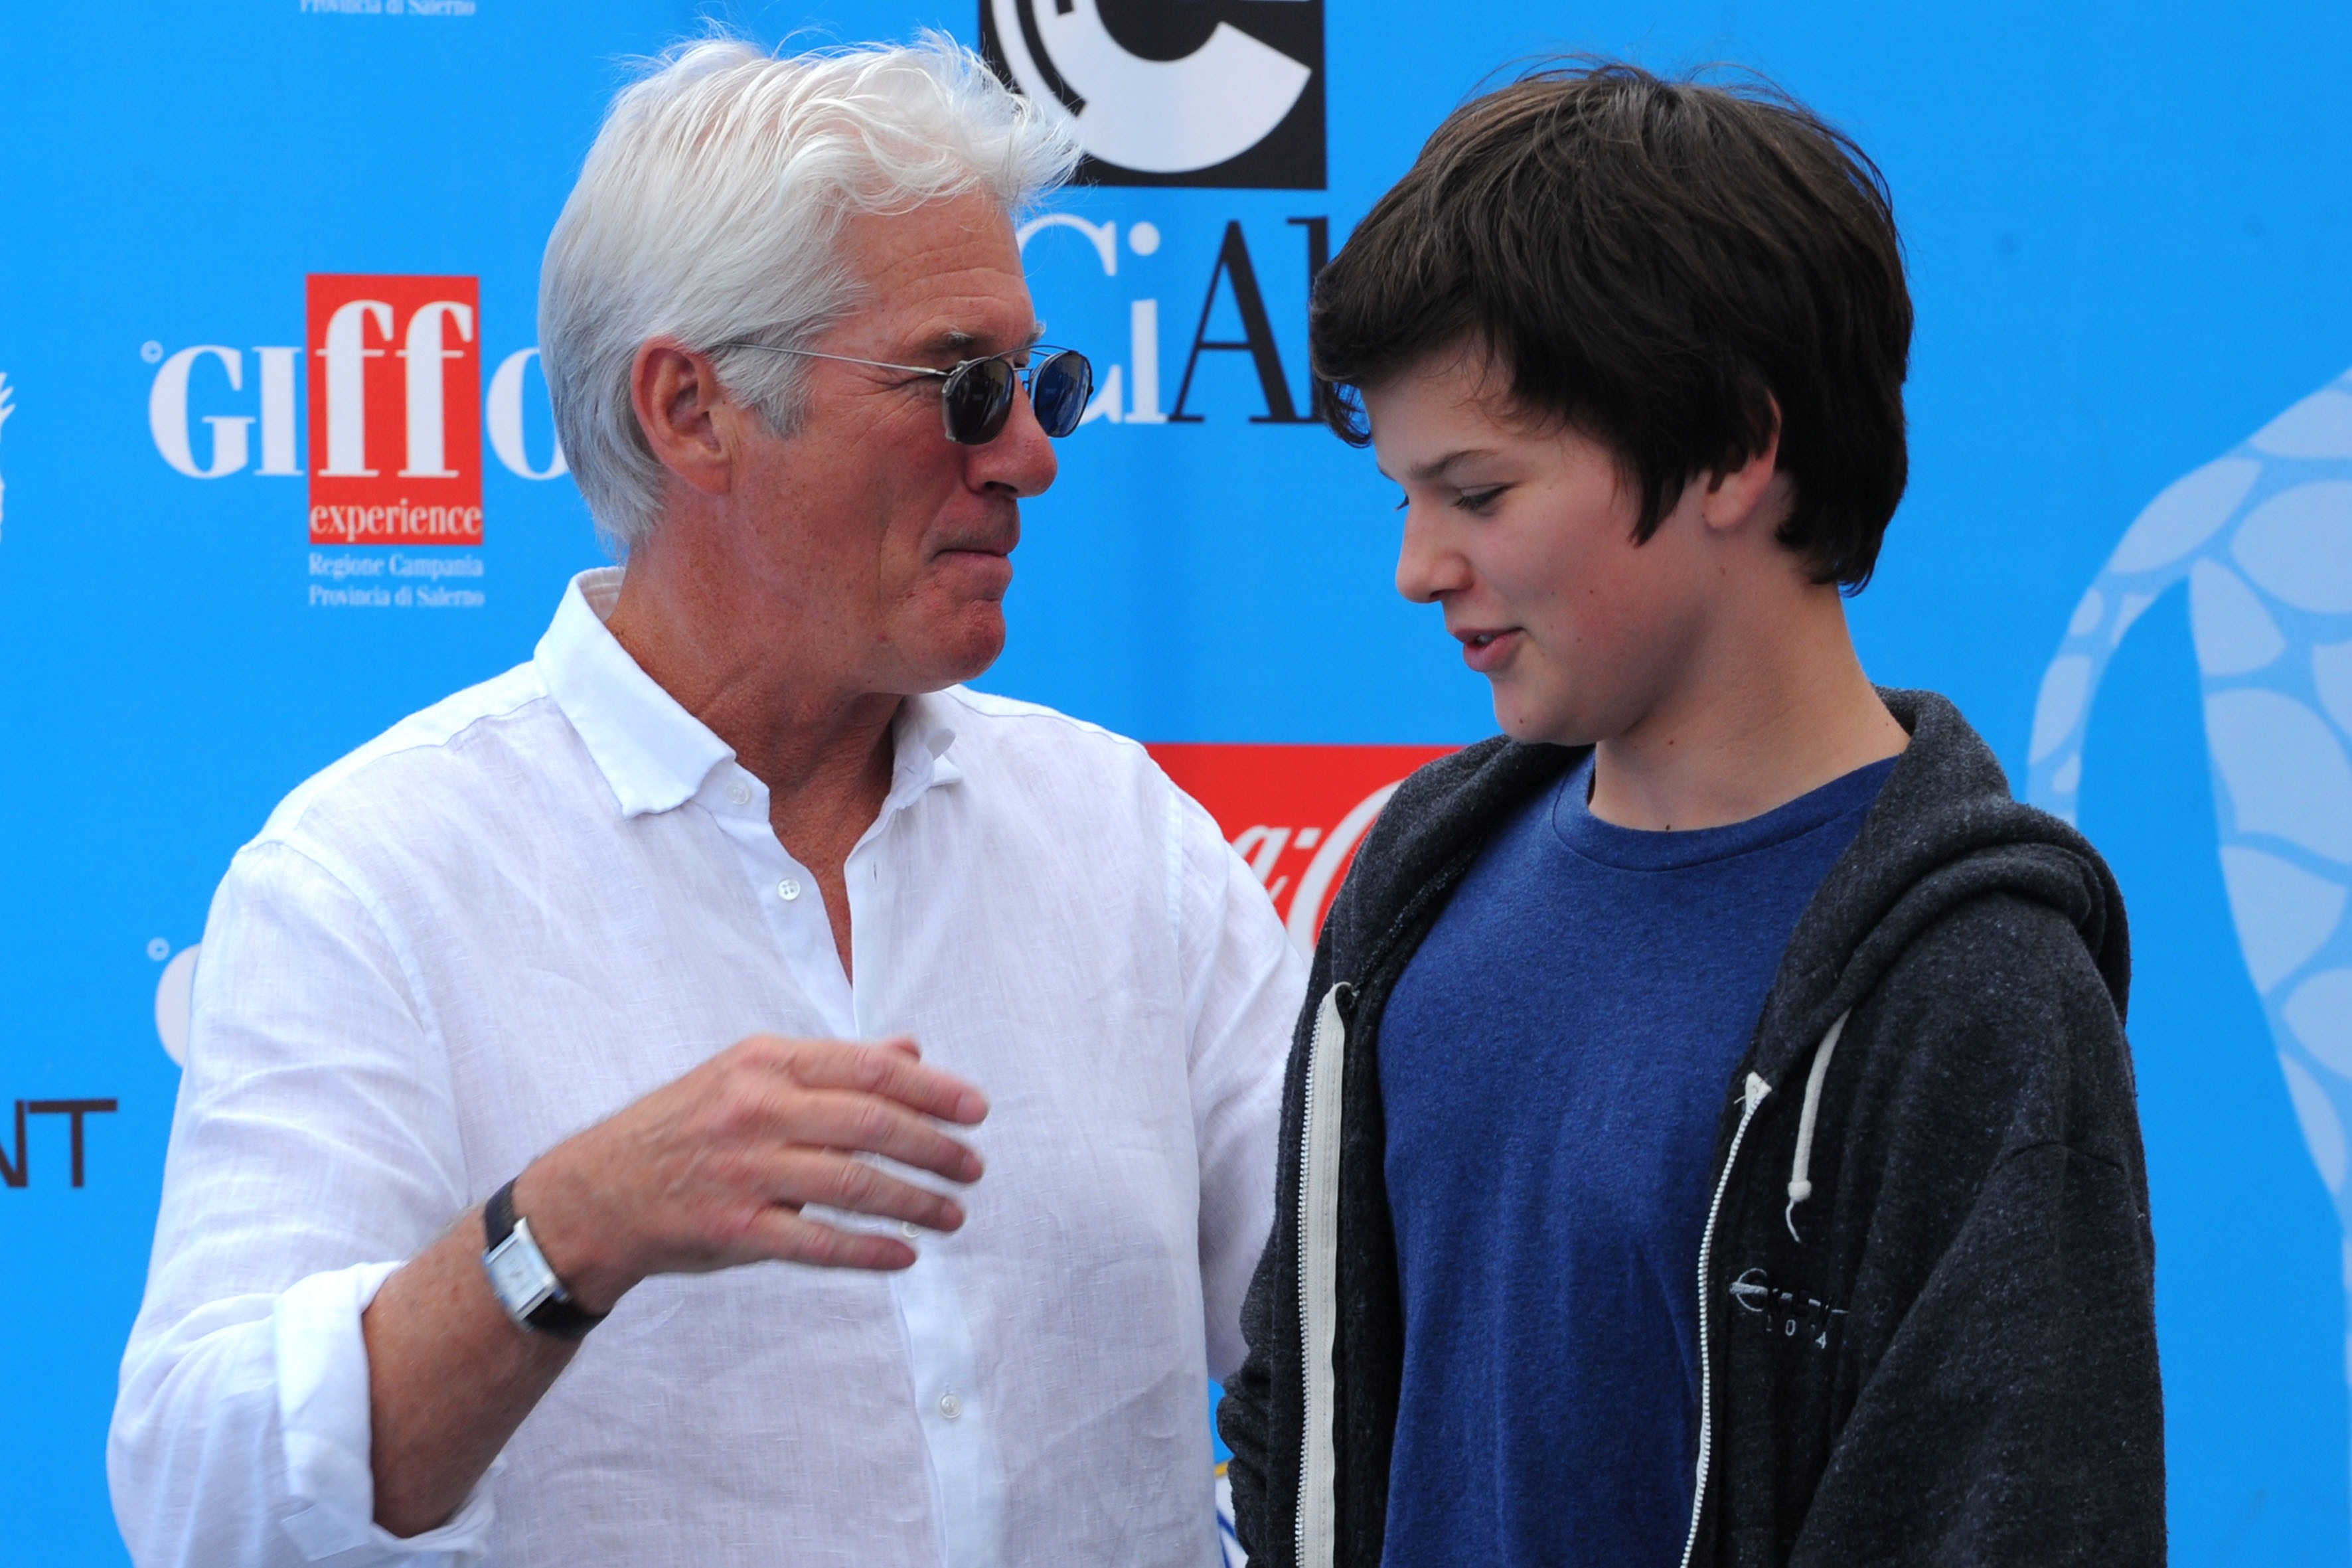 Richard Gere and Homer James Jigme Gere at the 44th edition of the Giffoni Film Festival in Giffoni Valle Piana, Italy on July 22, 2014. | Source: Getty Images